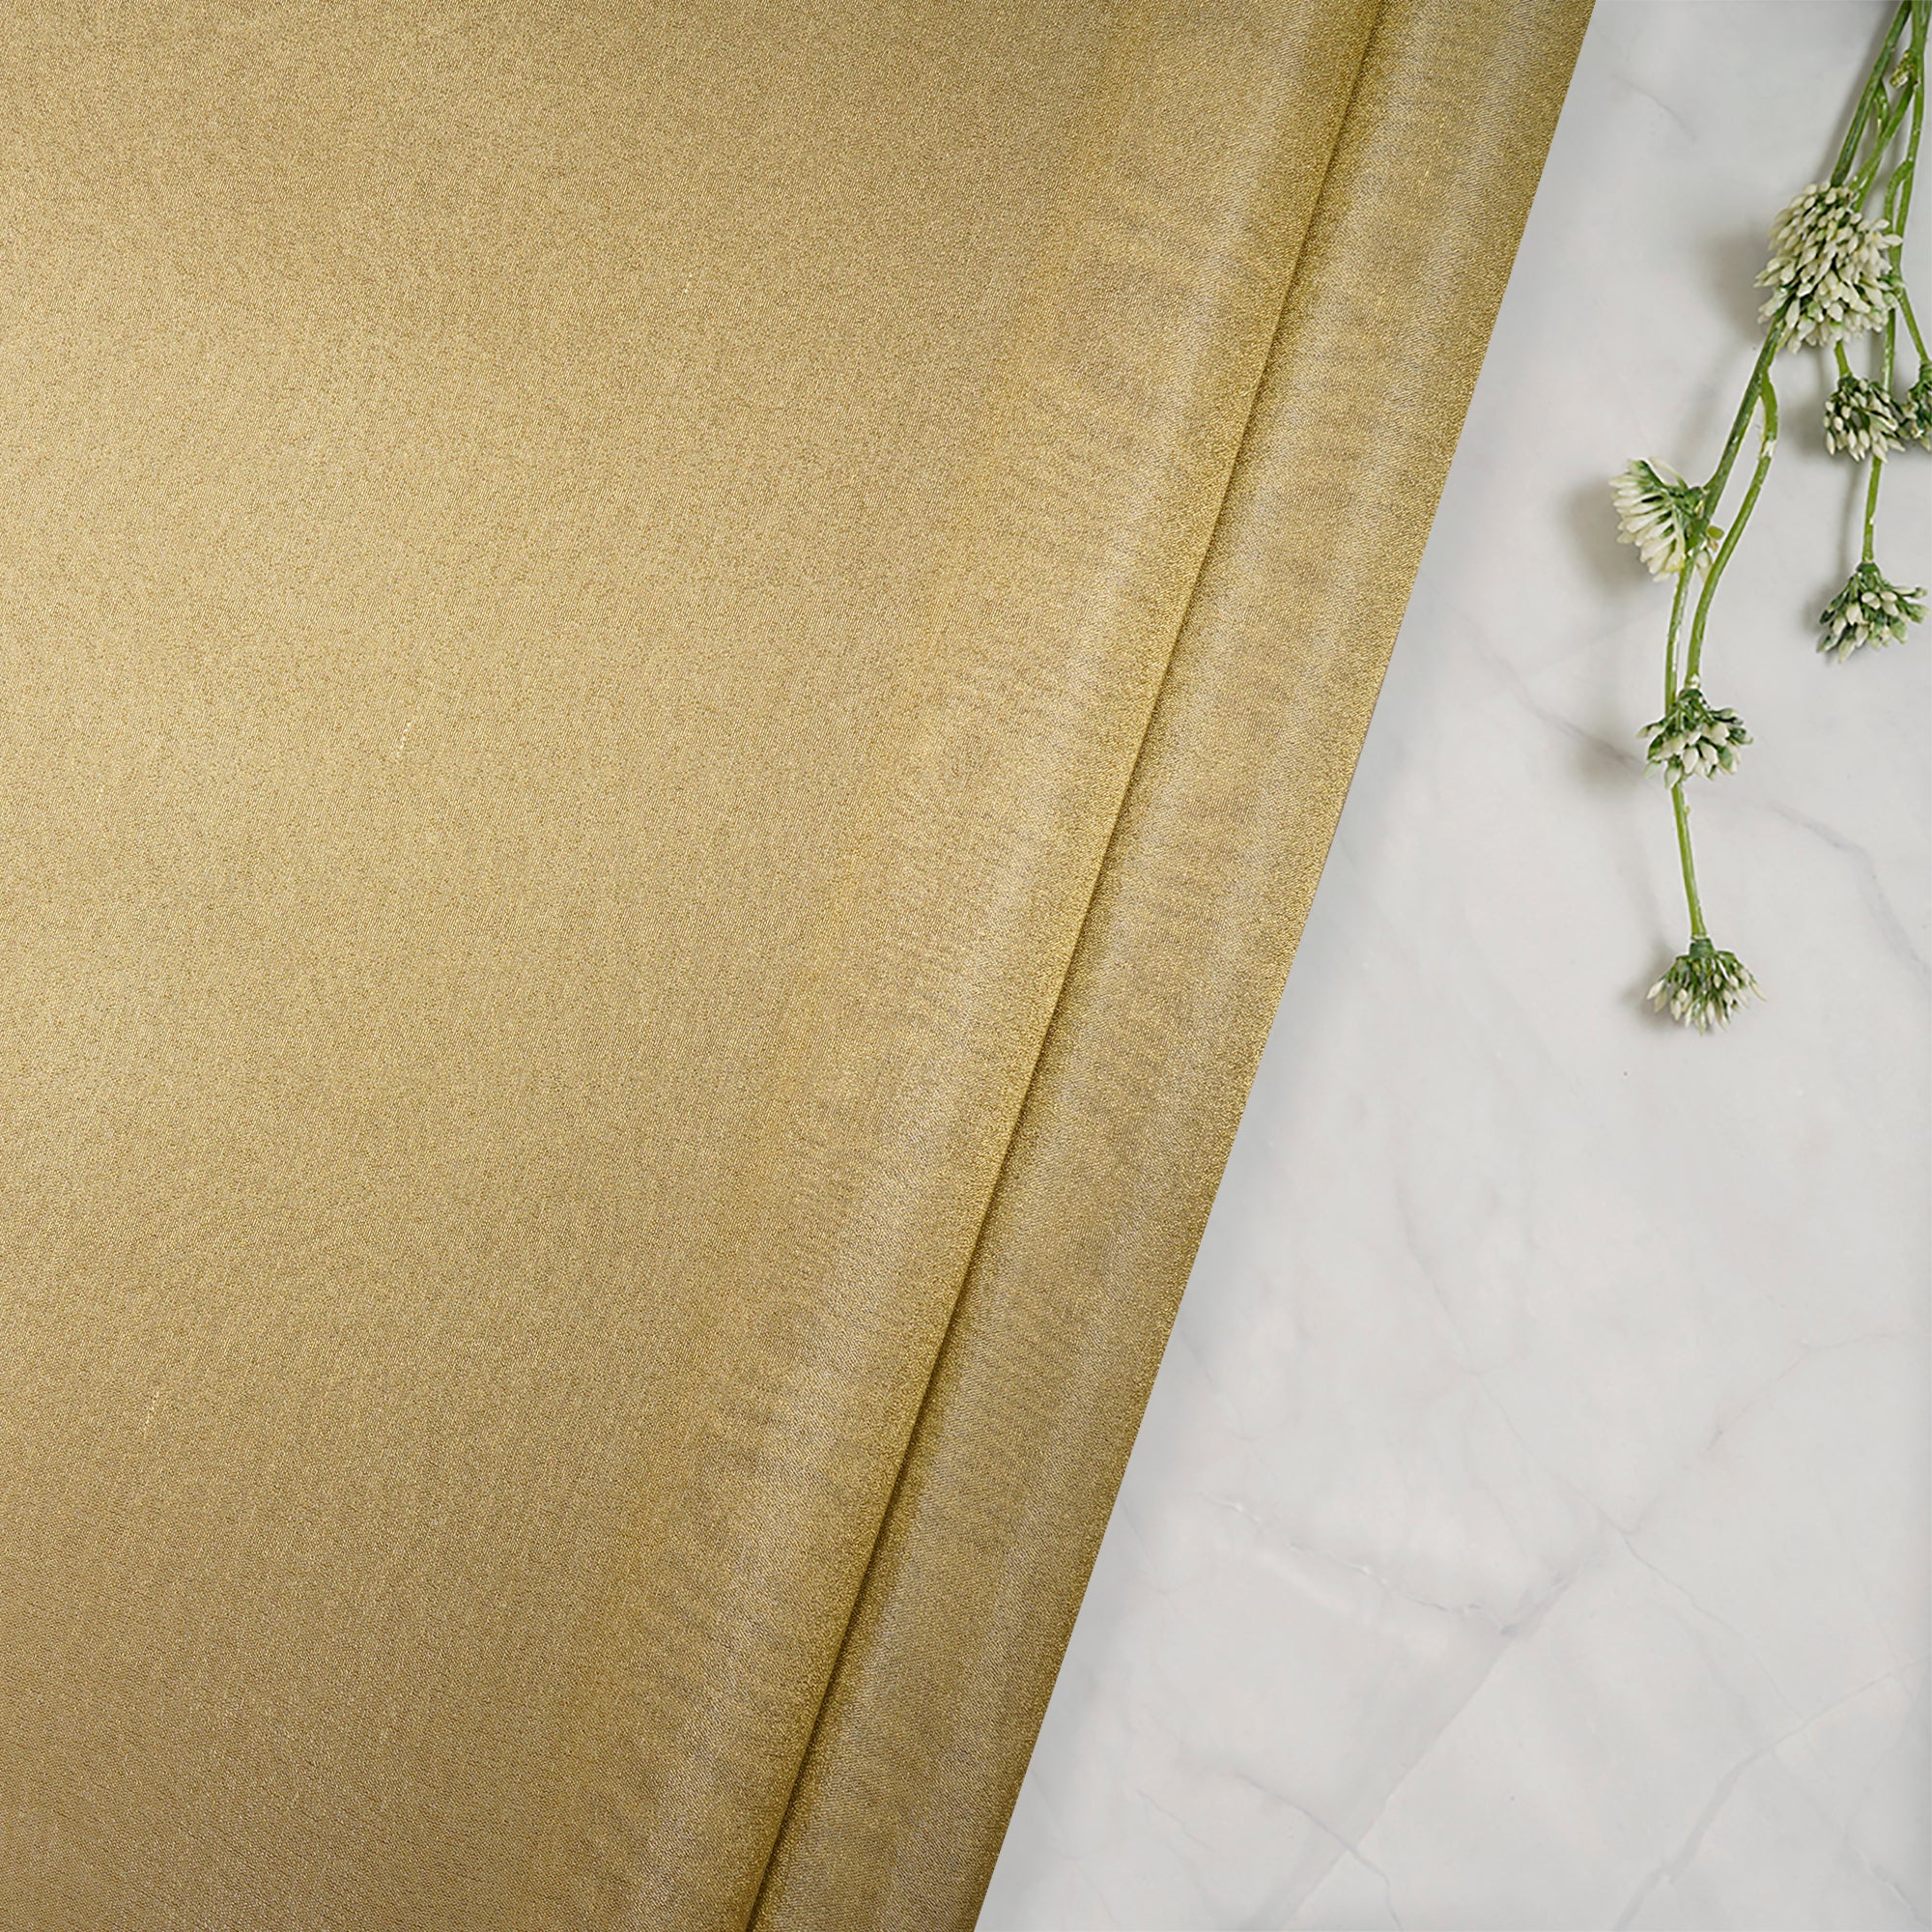 Golden Color Bemberg Crepe Fabric